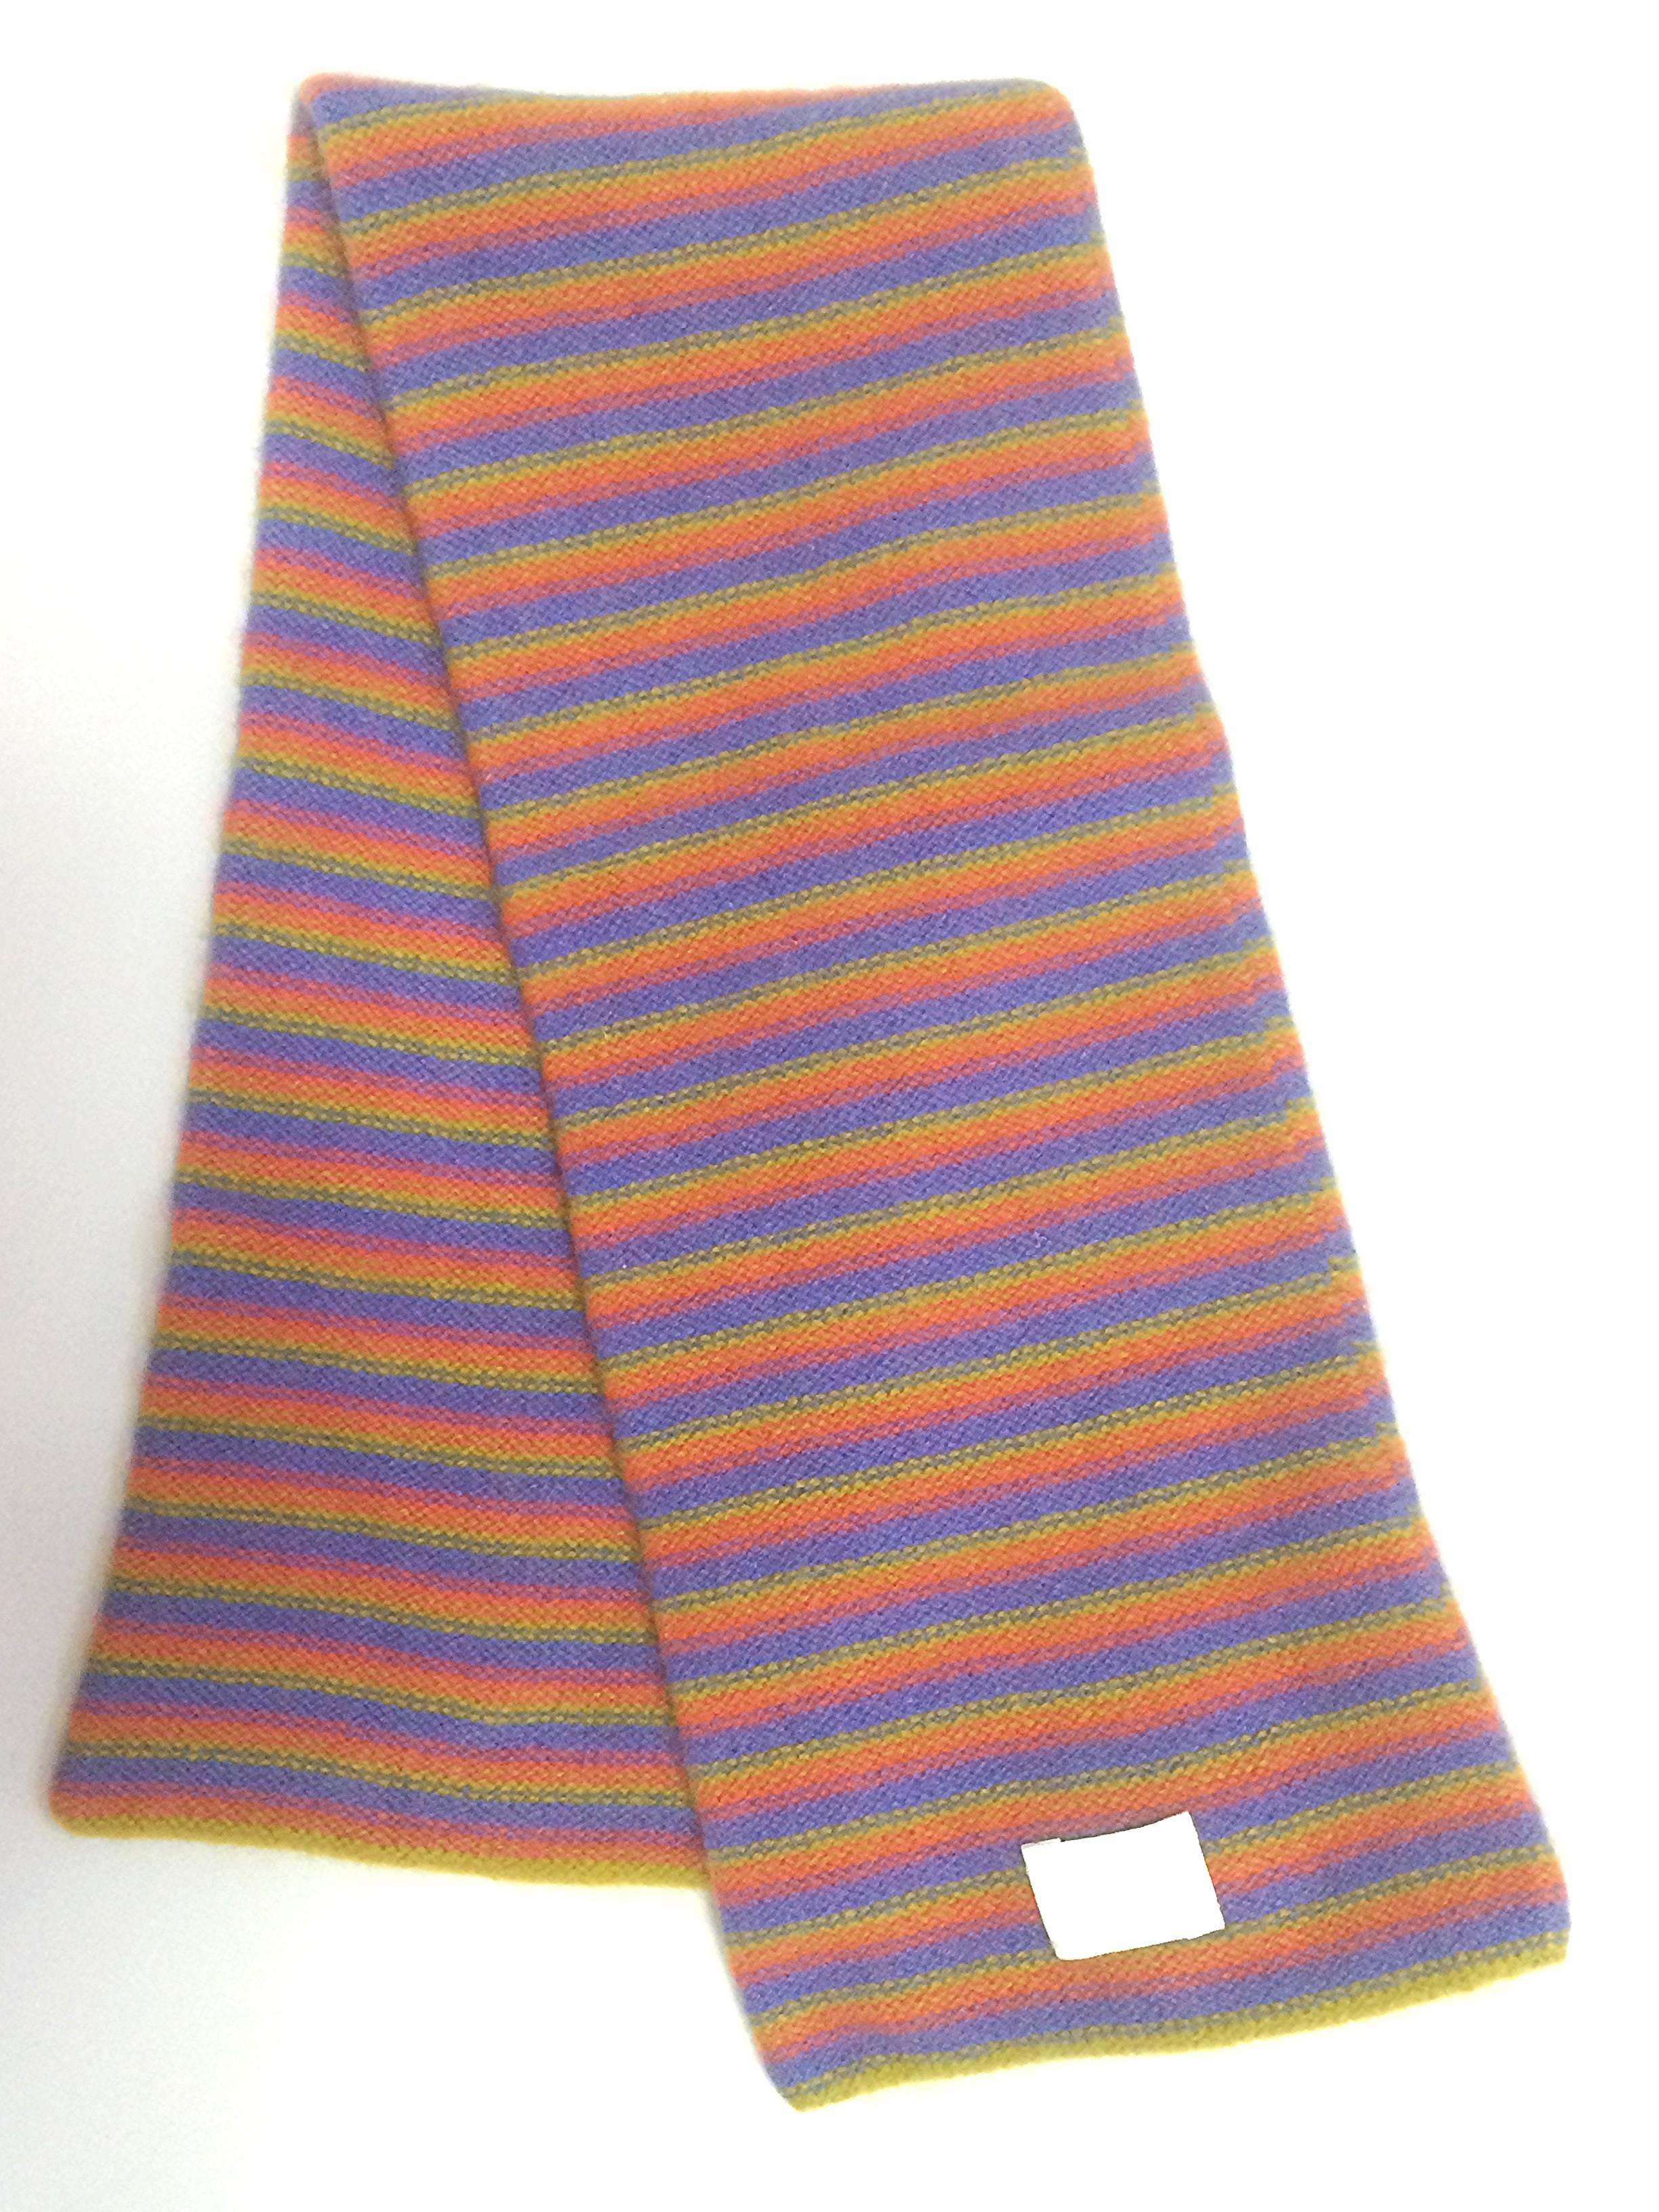 Brown Hermes 100% Cashmere kids, baby scarf and hat in multiple color stripe